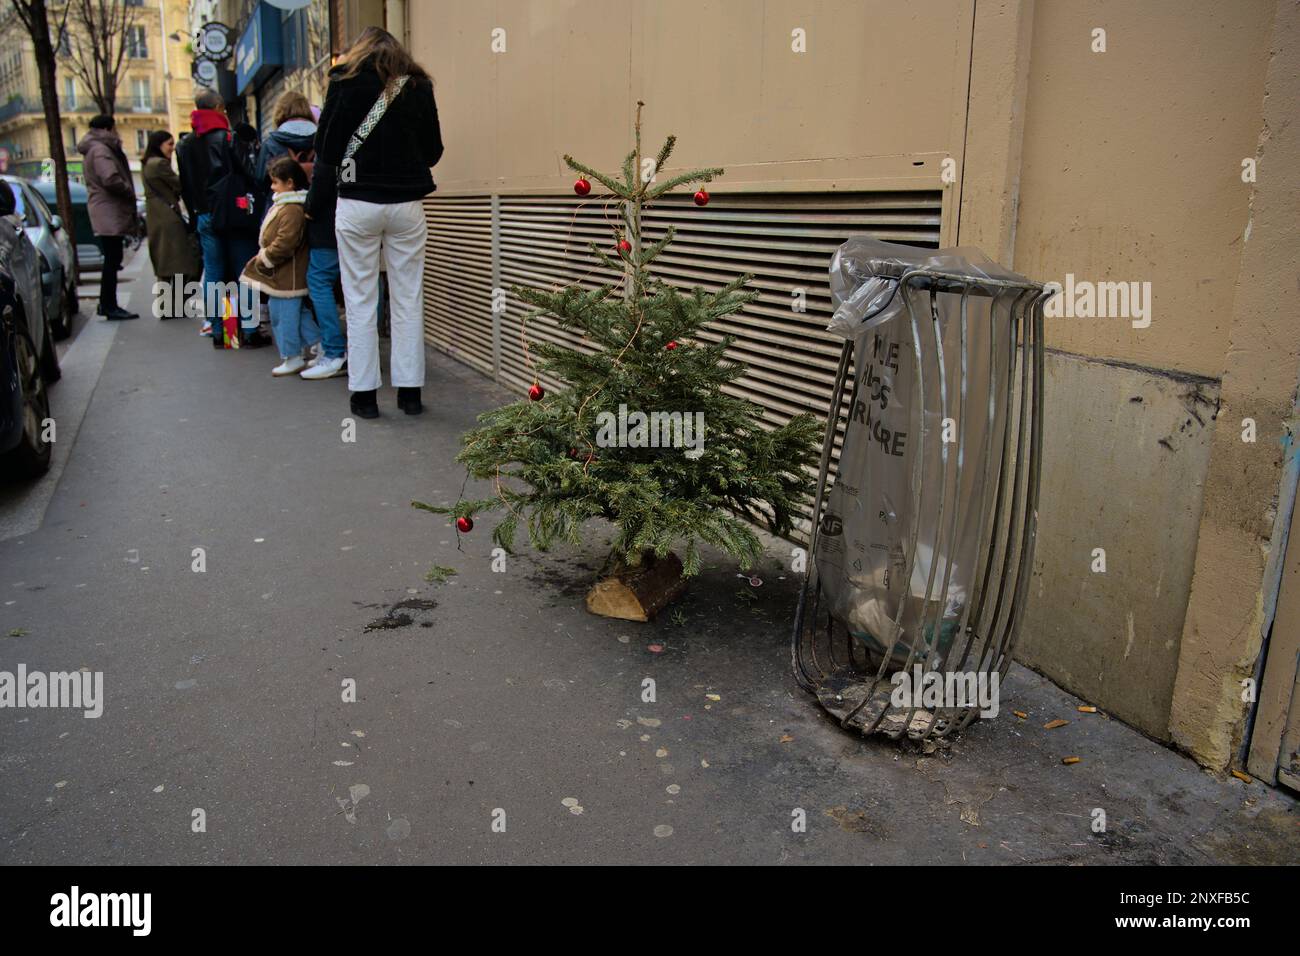 Christmas tree left next to a garbage can near a popular restaurant with a queue in the street Stock Photo